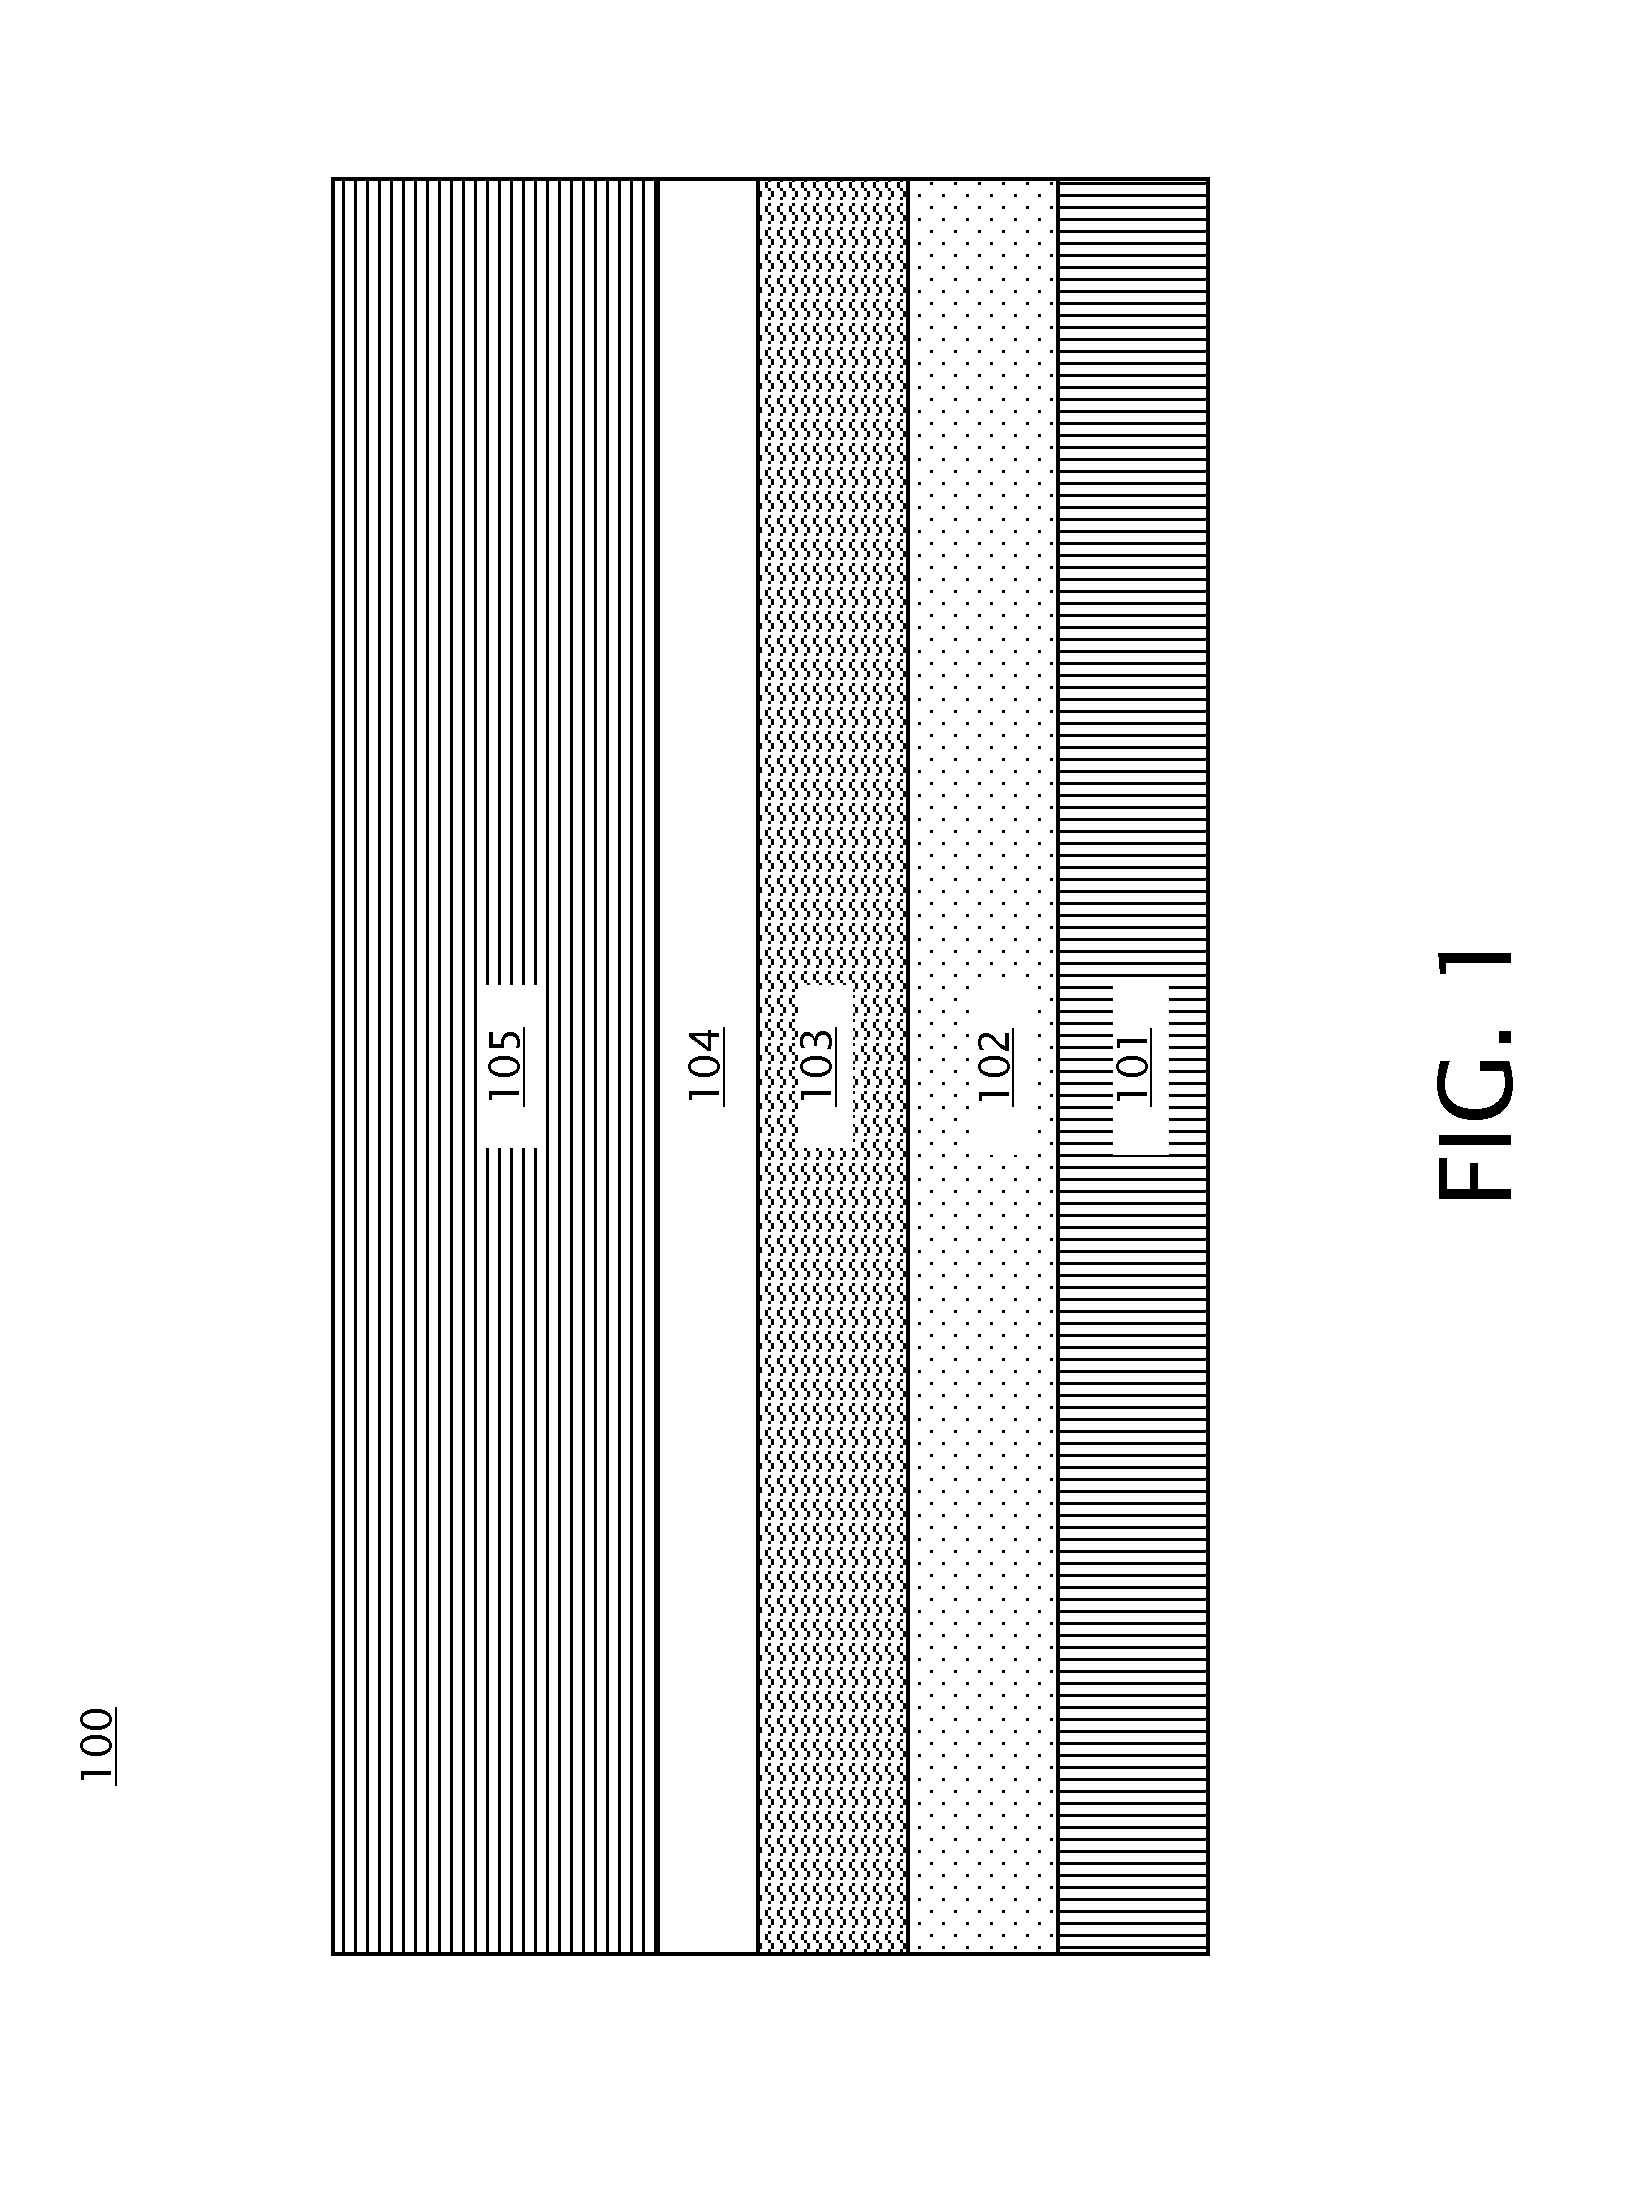 Magnetic tunnel junction with spacer layer for spin torque switched MRAM